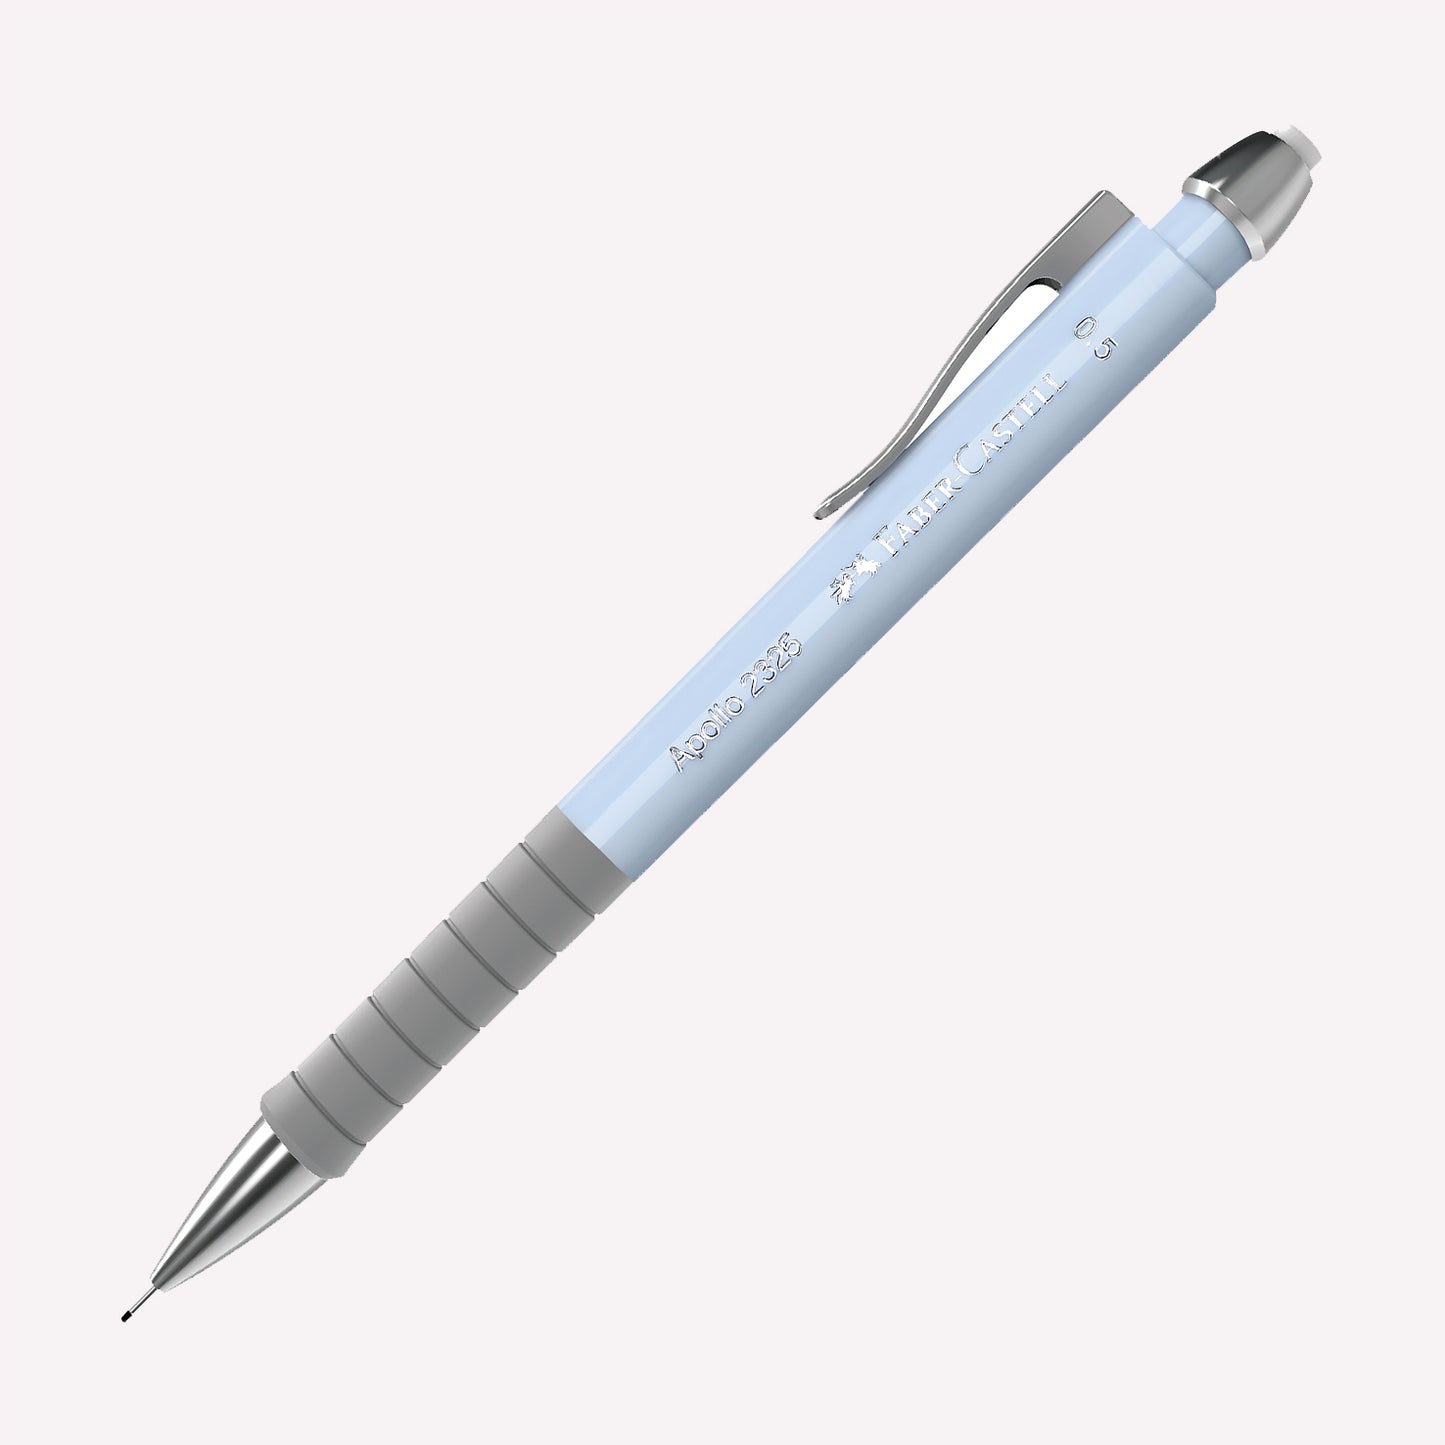 Faber-Castell Apollo 2325 0.5 Mechanical Pencil in sky blue, with a coloured barrel and rubber grip area, topped with a small white eraser. 